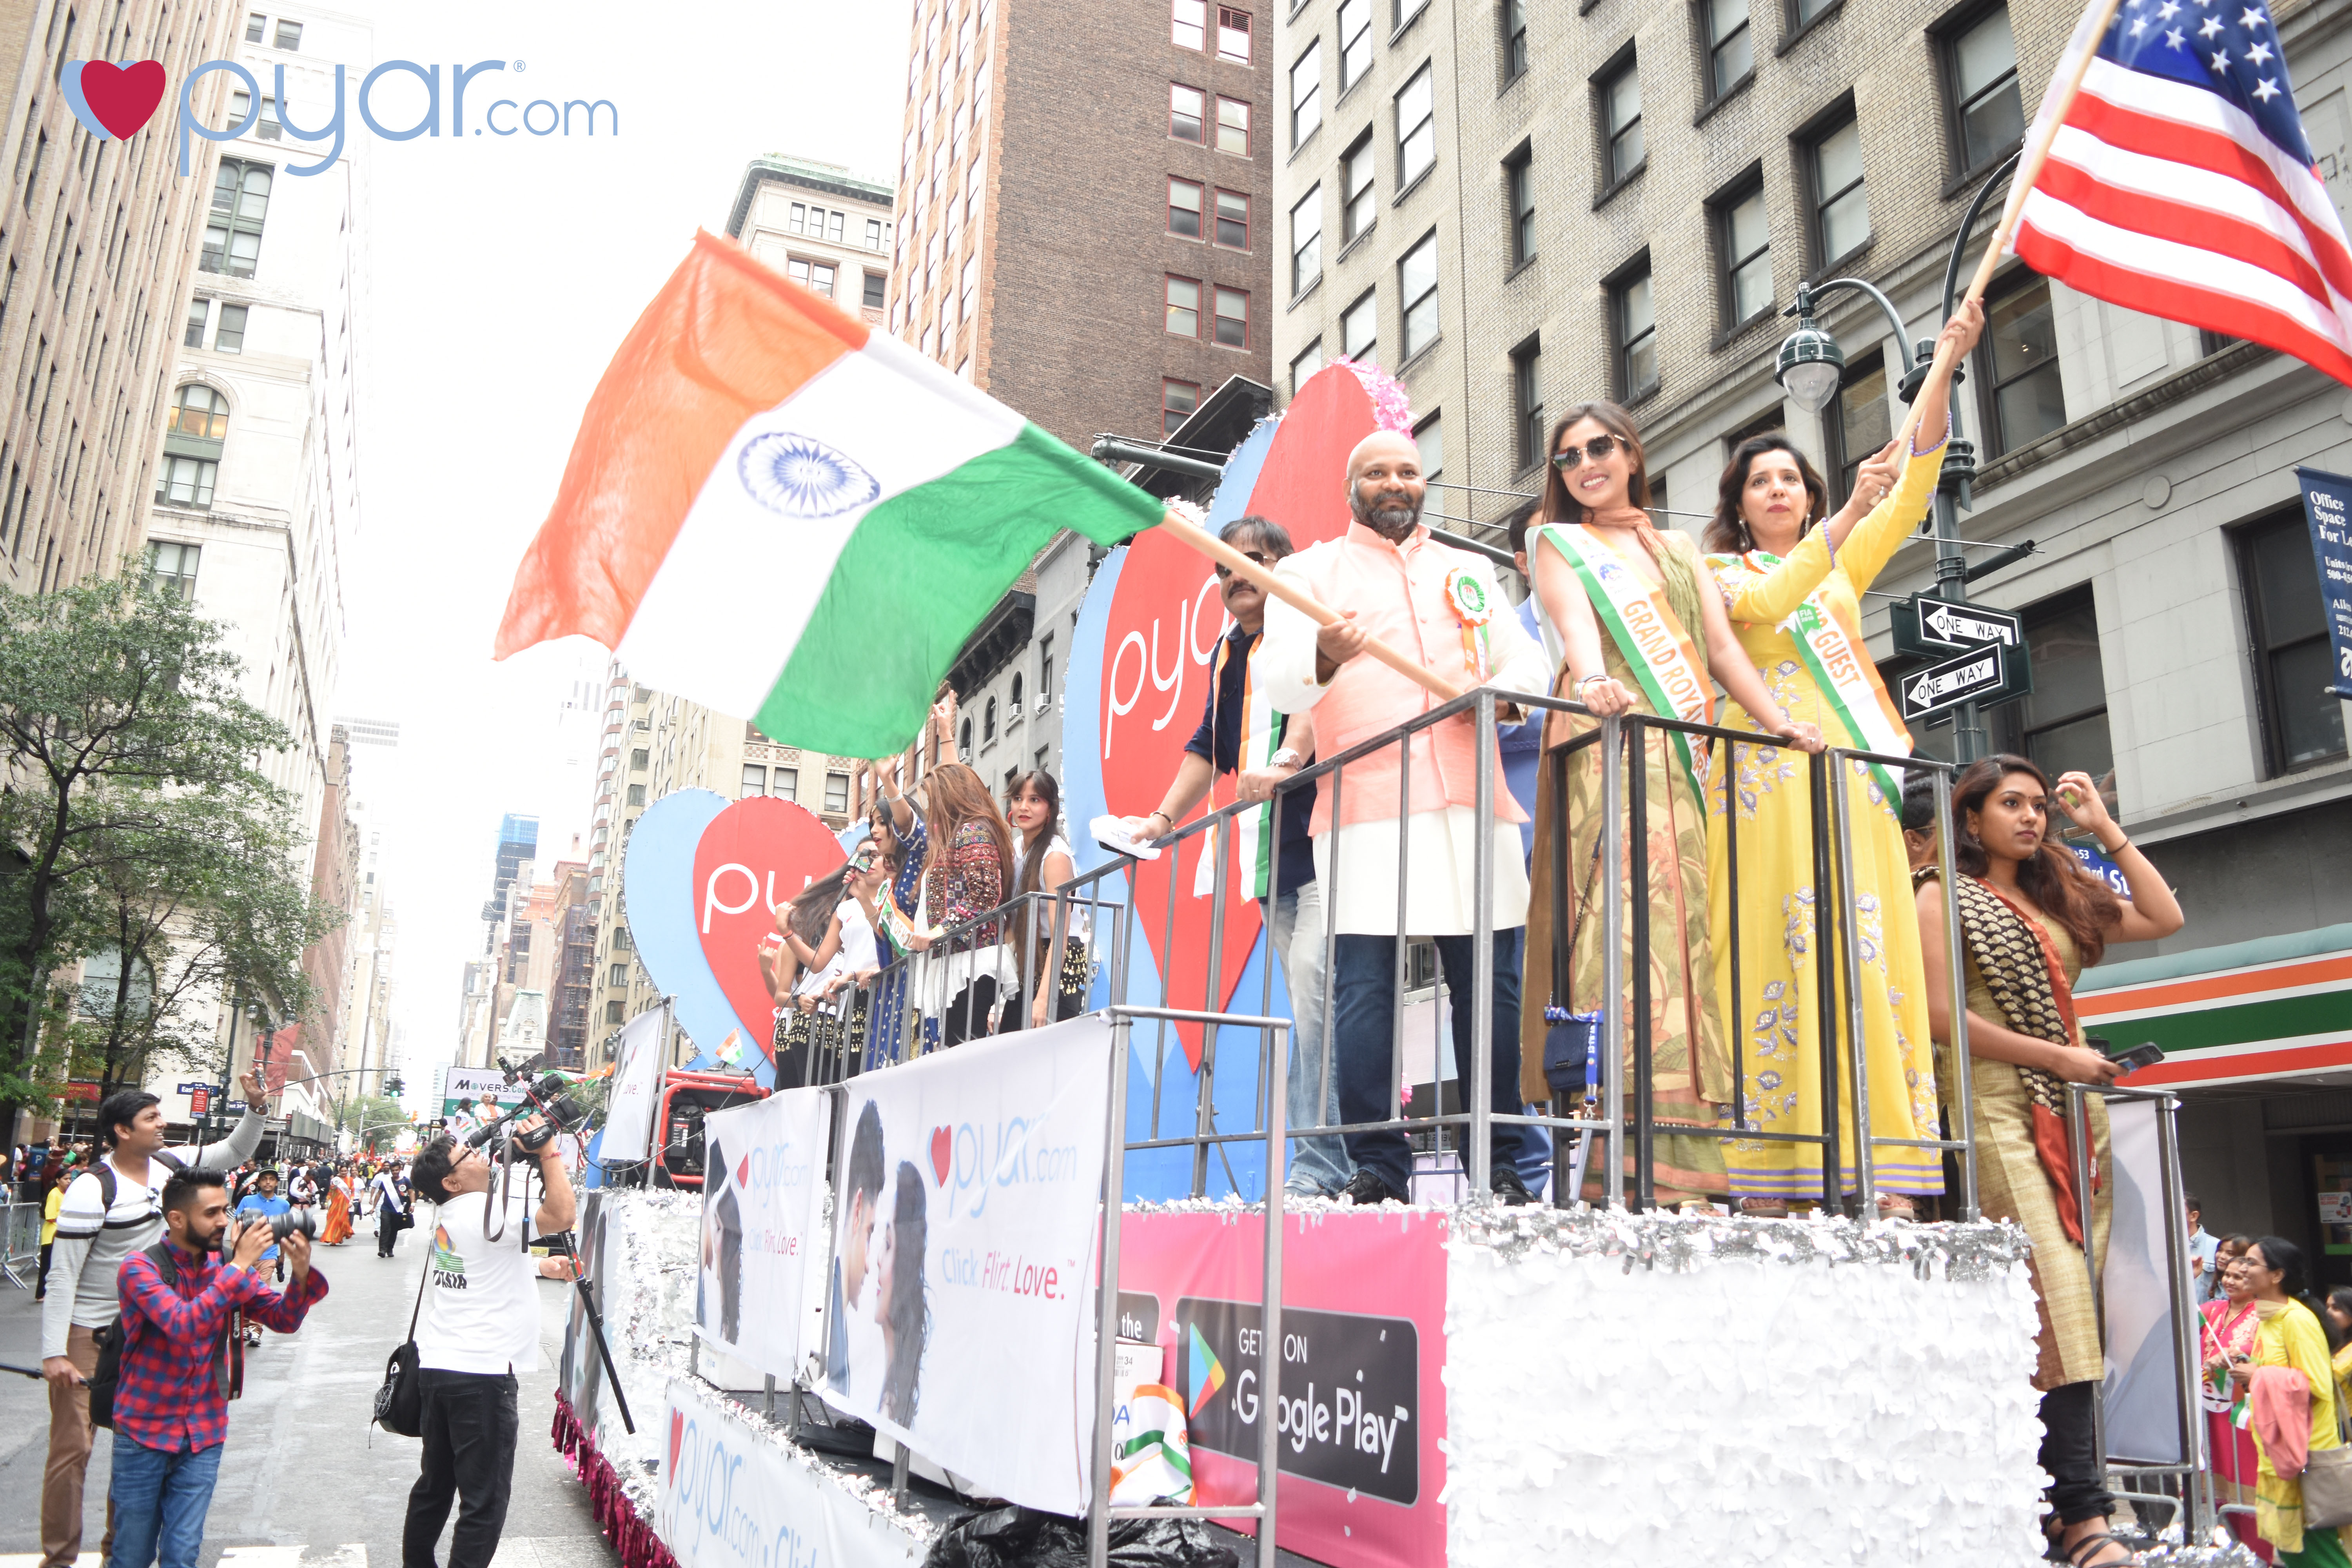 Actress/Model Madhu Shalini on the Title Sponsor Pyar.com float with CEO Vidyadhar Garapati at 2018 India Day Parade in New York City